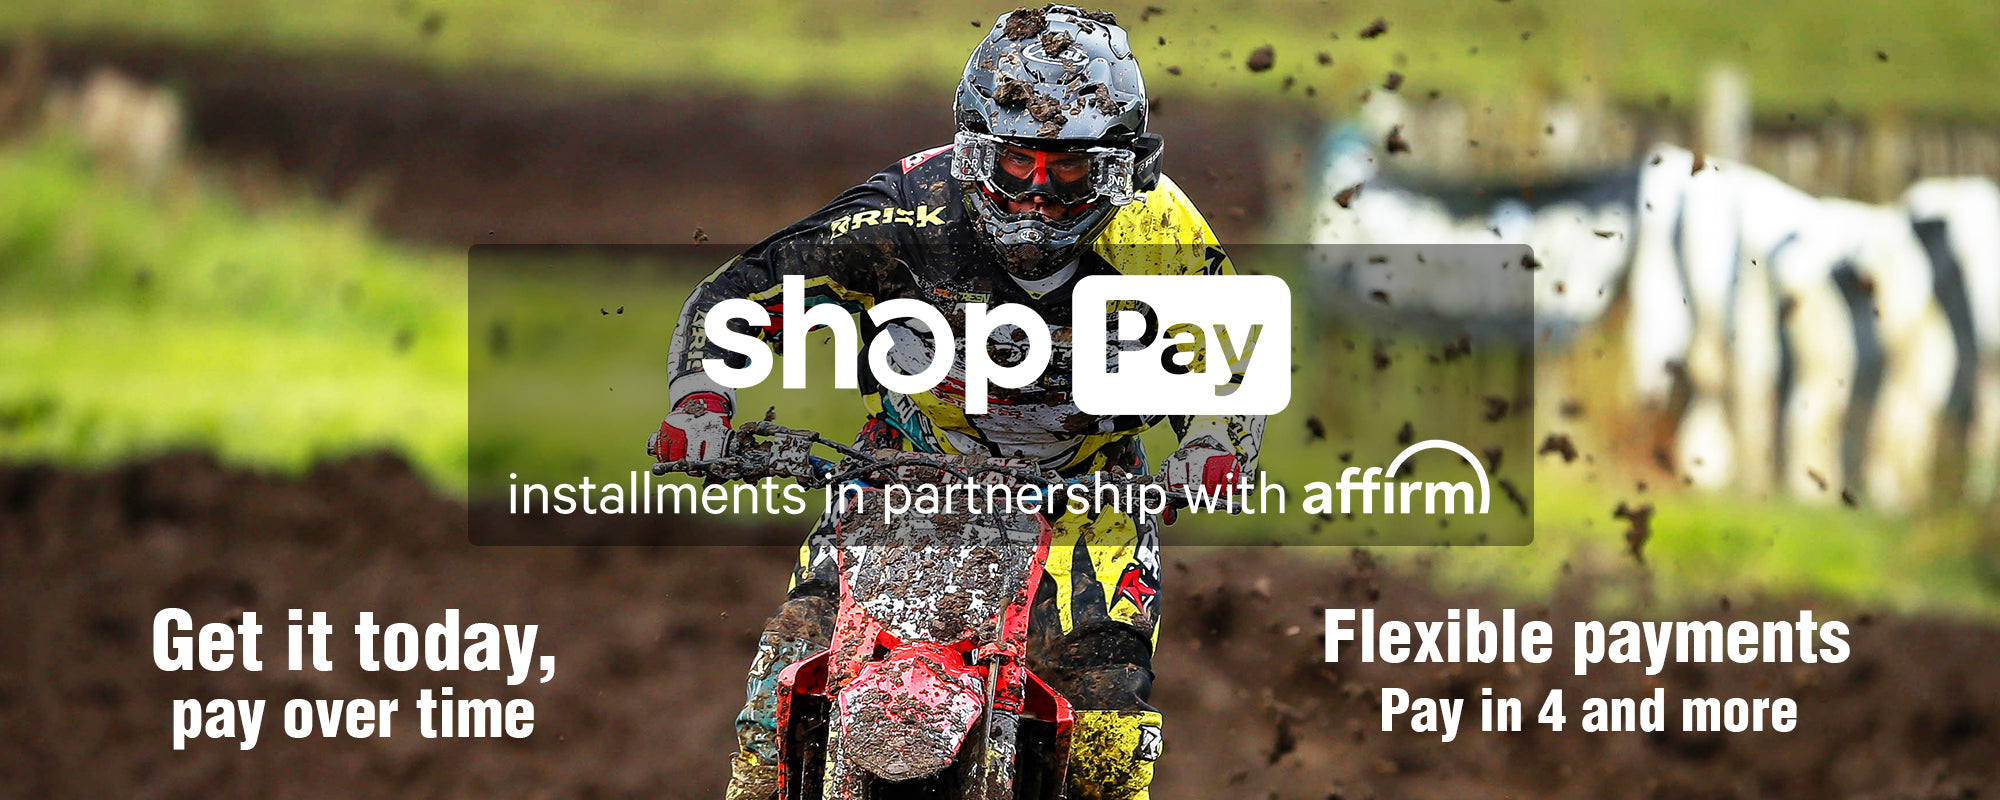 Shop Pay payment plans banner with mx racer flying through the mud towards camera. Text reads: installments in partnership with affirm. Get it today, pay over time. Flexible payments. Pay in 4 and more.